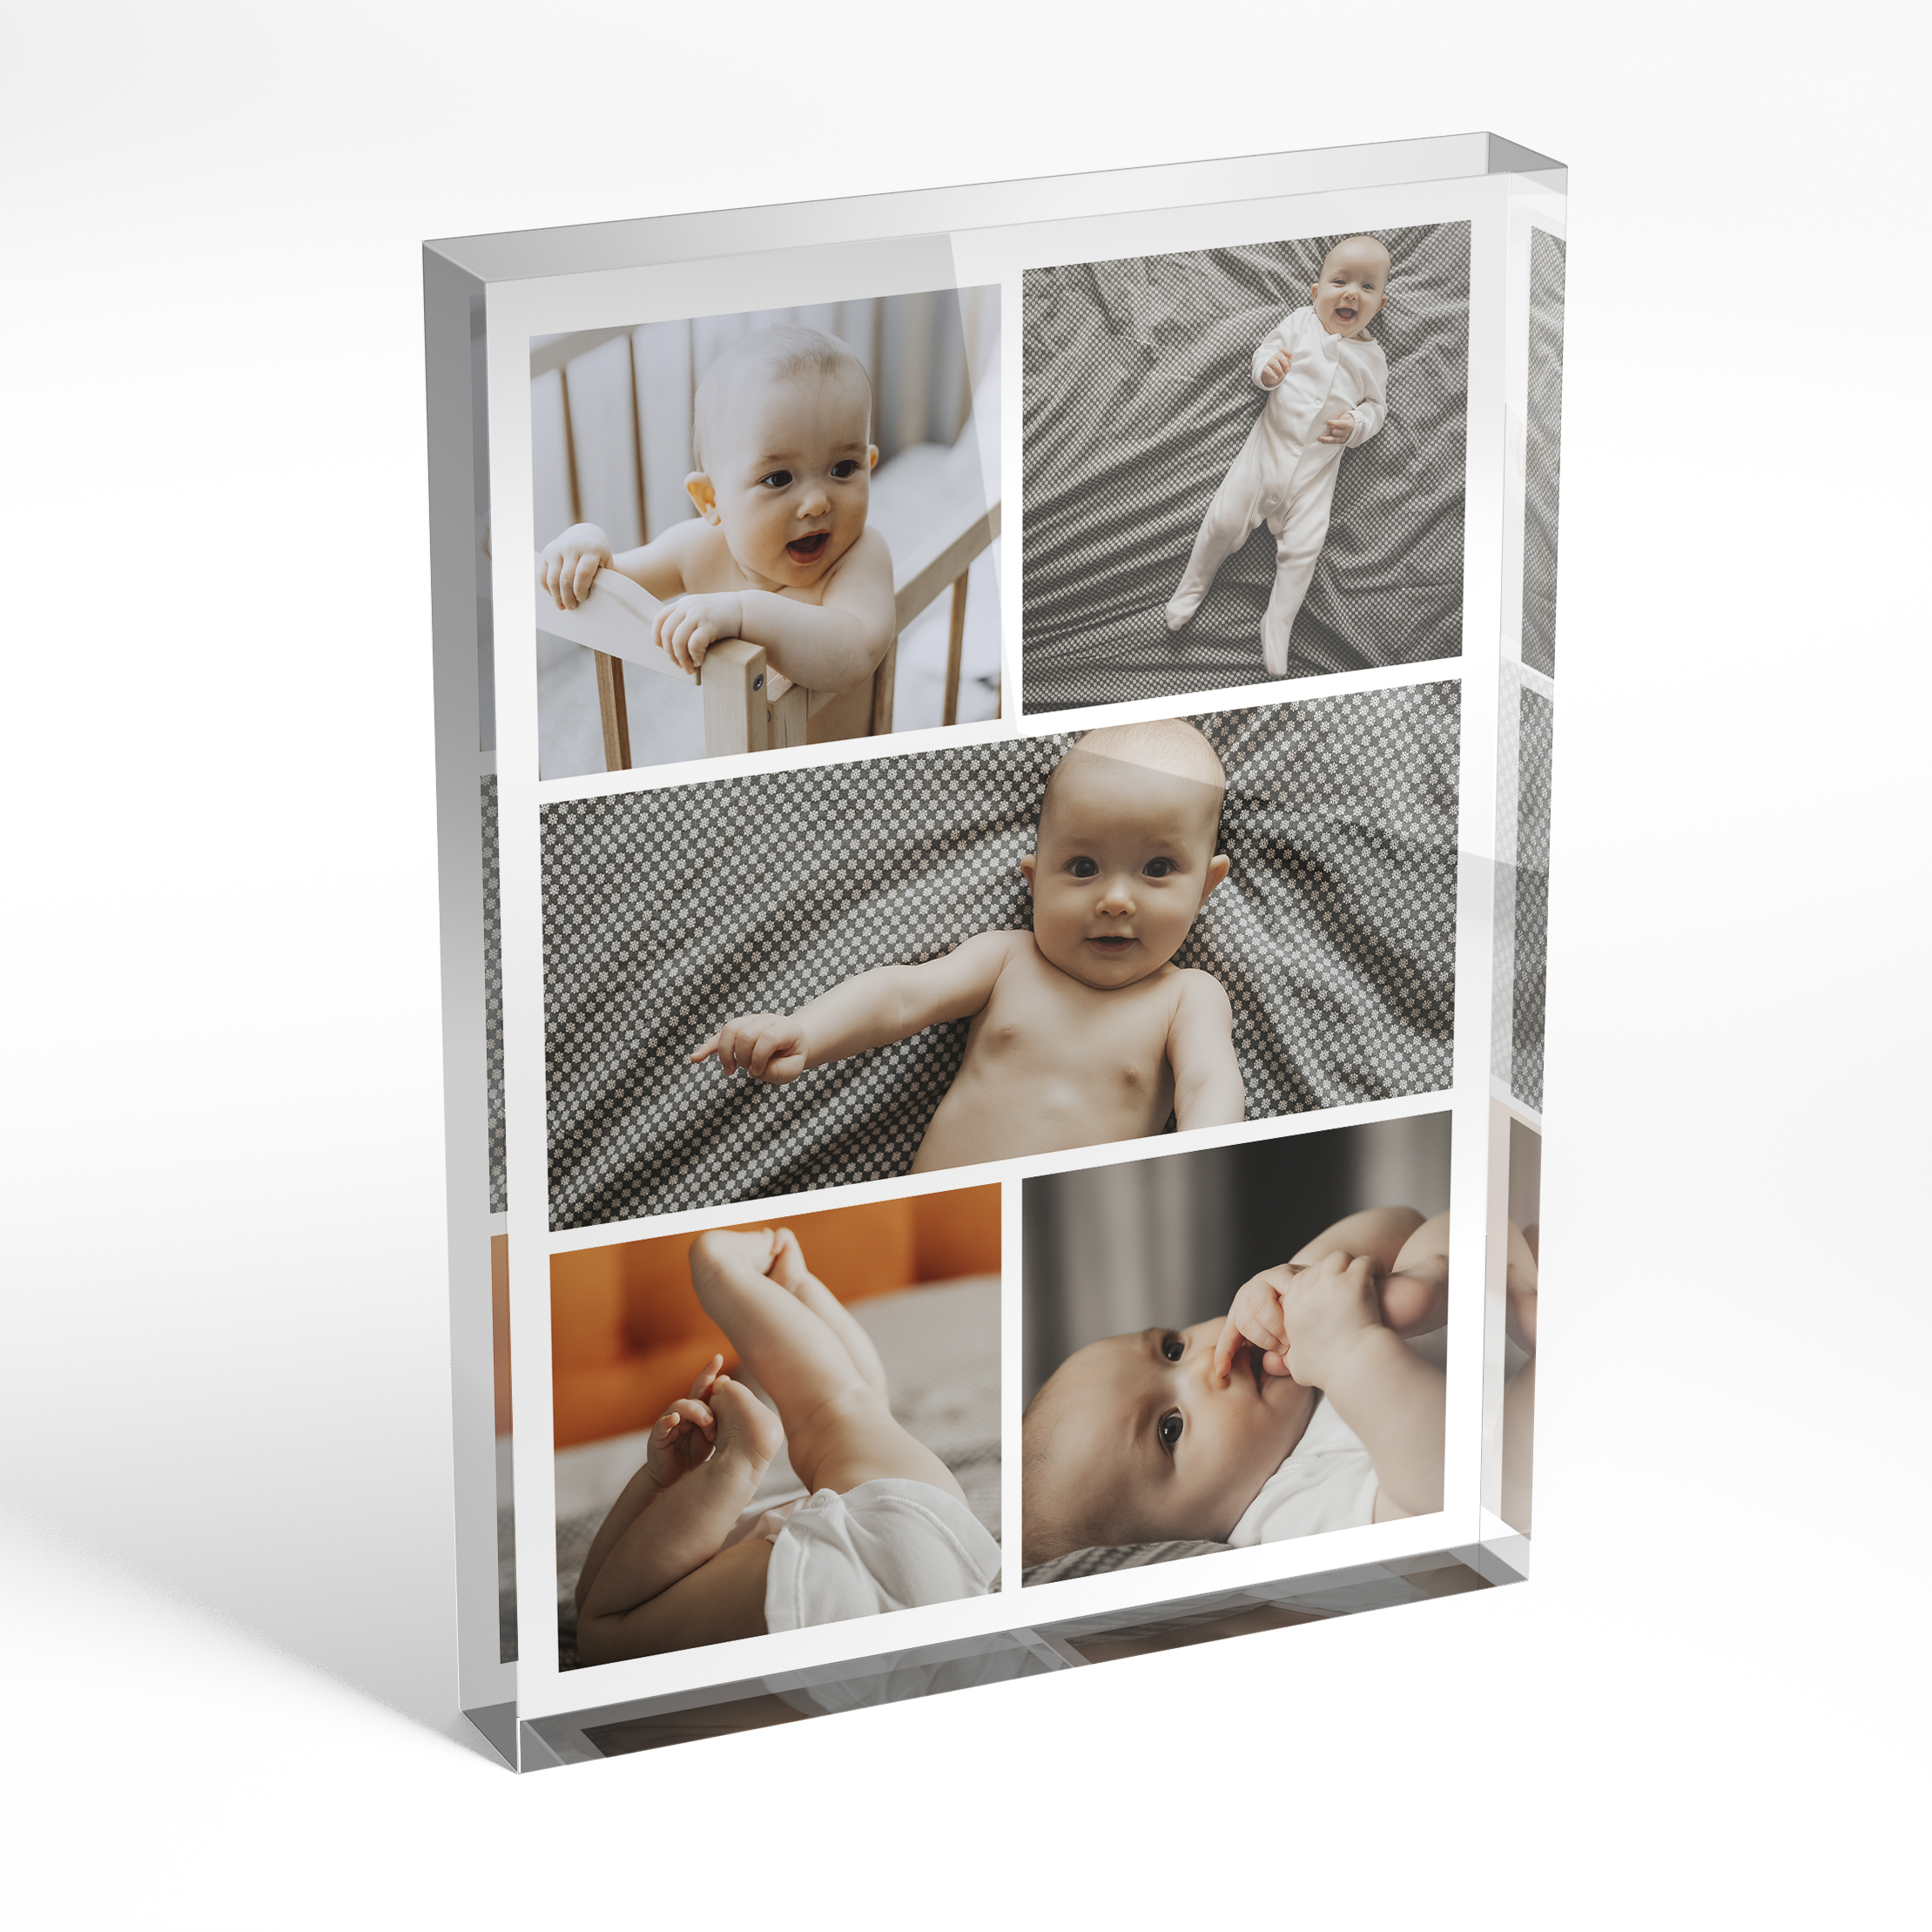 An angled side view of a portrait layout Acrylic Glass Photo Block with space for 5 photos. Thiis design is named "Childhood Kaleidoscope". 